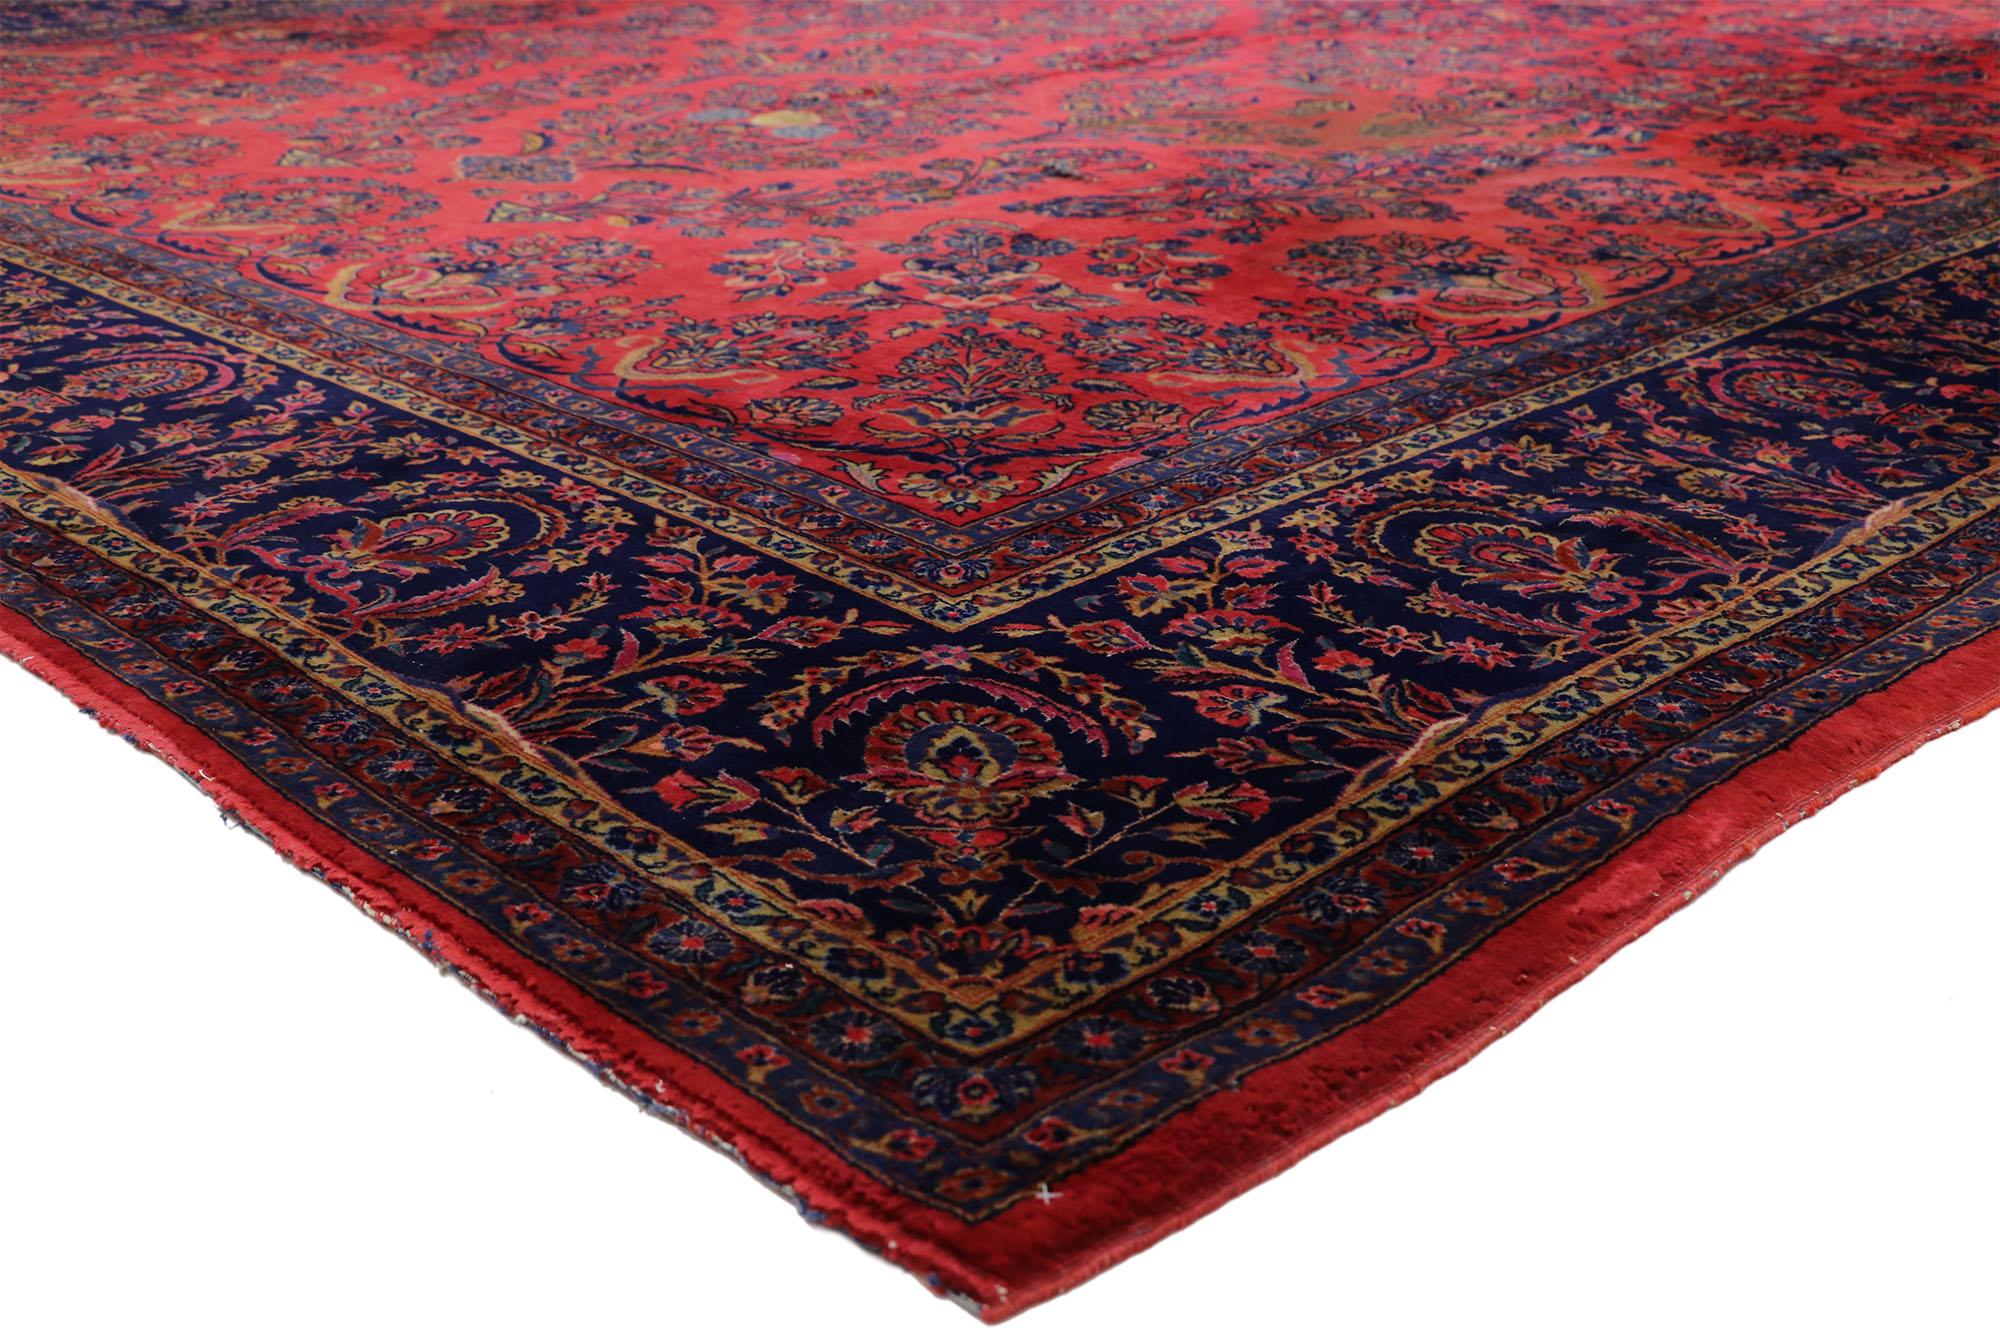 77370, antique Persian Kashan palace rug with English Tudor Jacobean style. Rich in color, texture and beguiling ambiance, this hand knotted wool antique Persian Kashan palace rug features an all-over pattern composed of a lavish vase design and